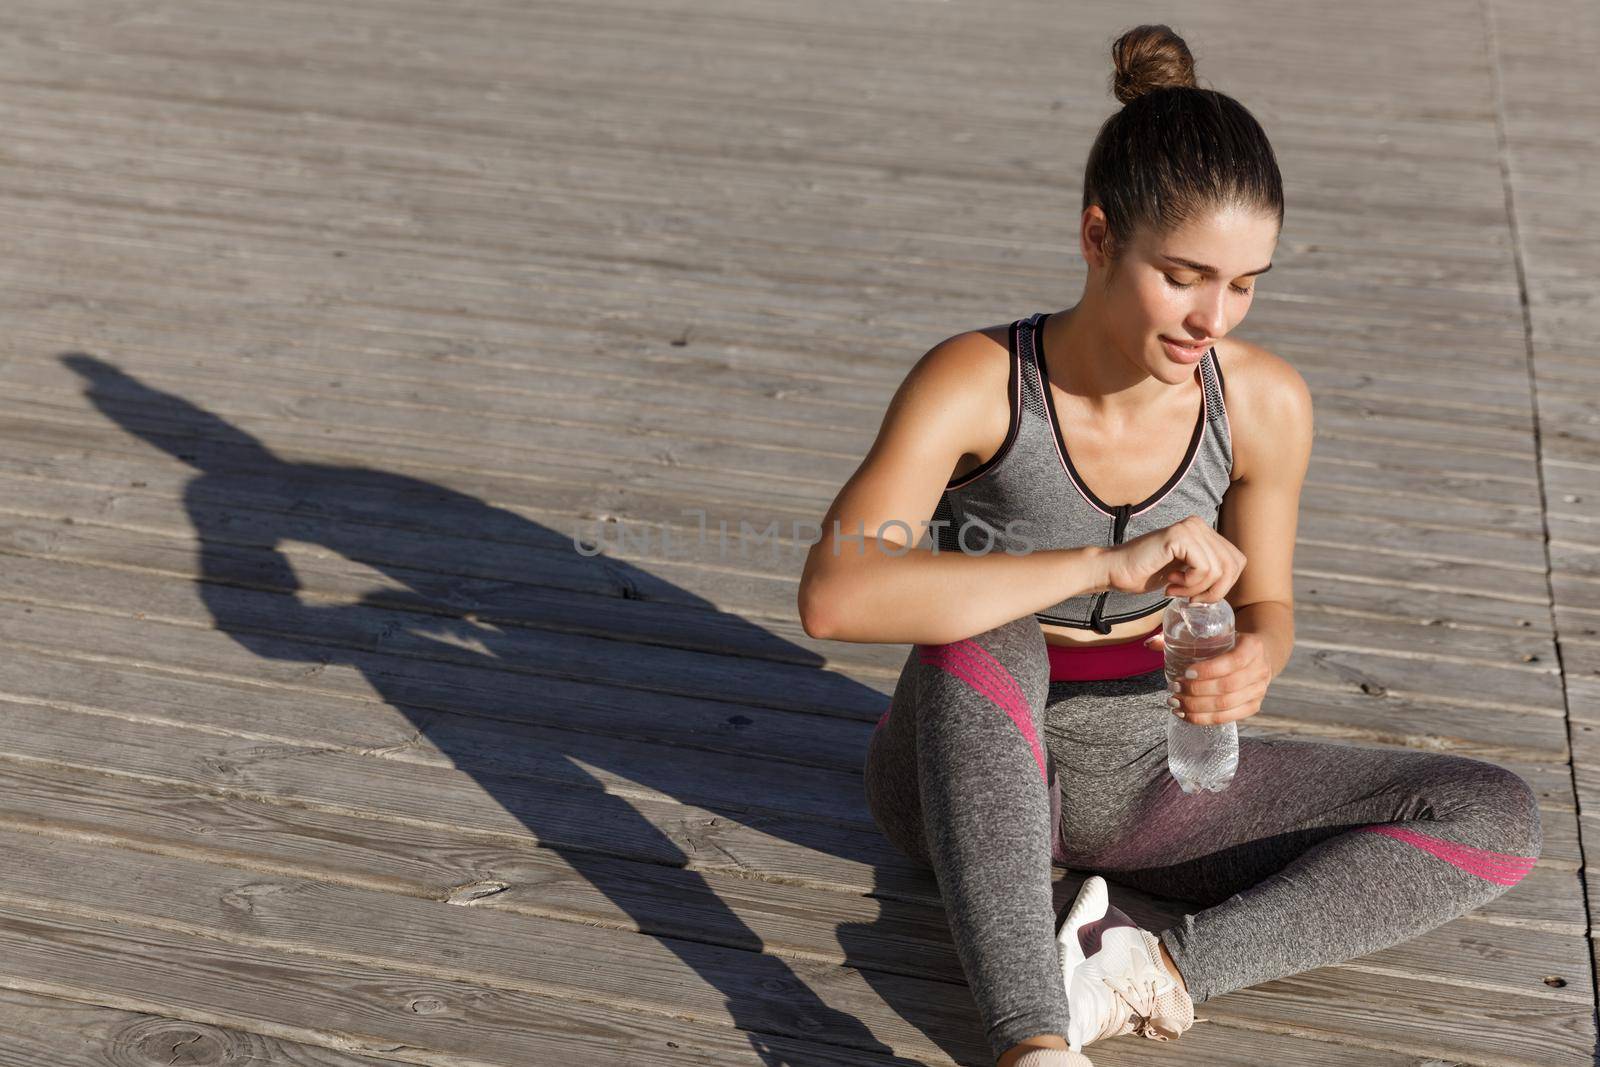 Outdoor shot of attractive fitness woman having a break after jogging, sitting on floor and drinking water, working out near the sea.